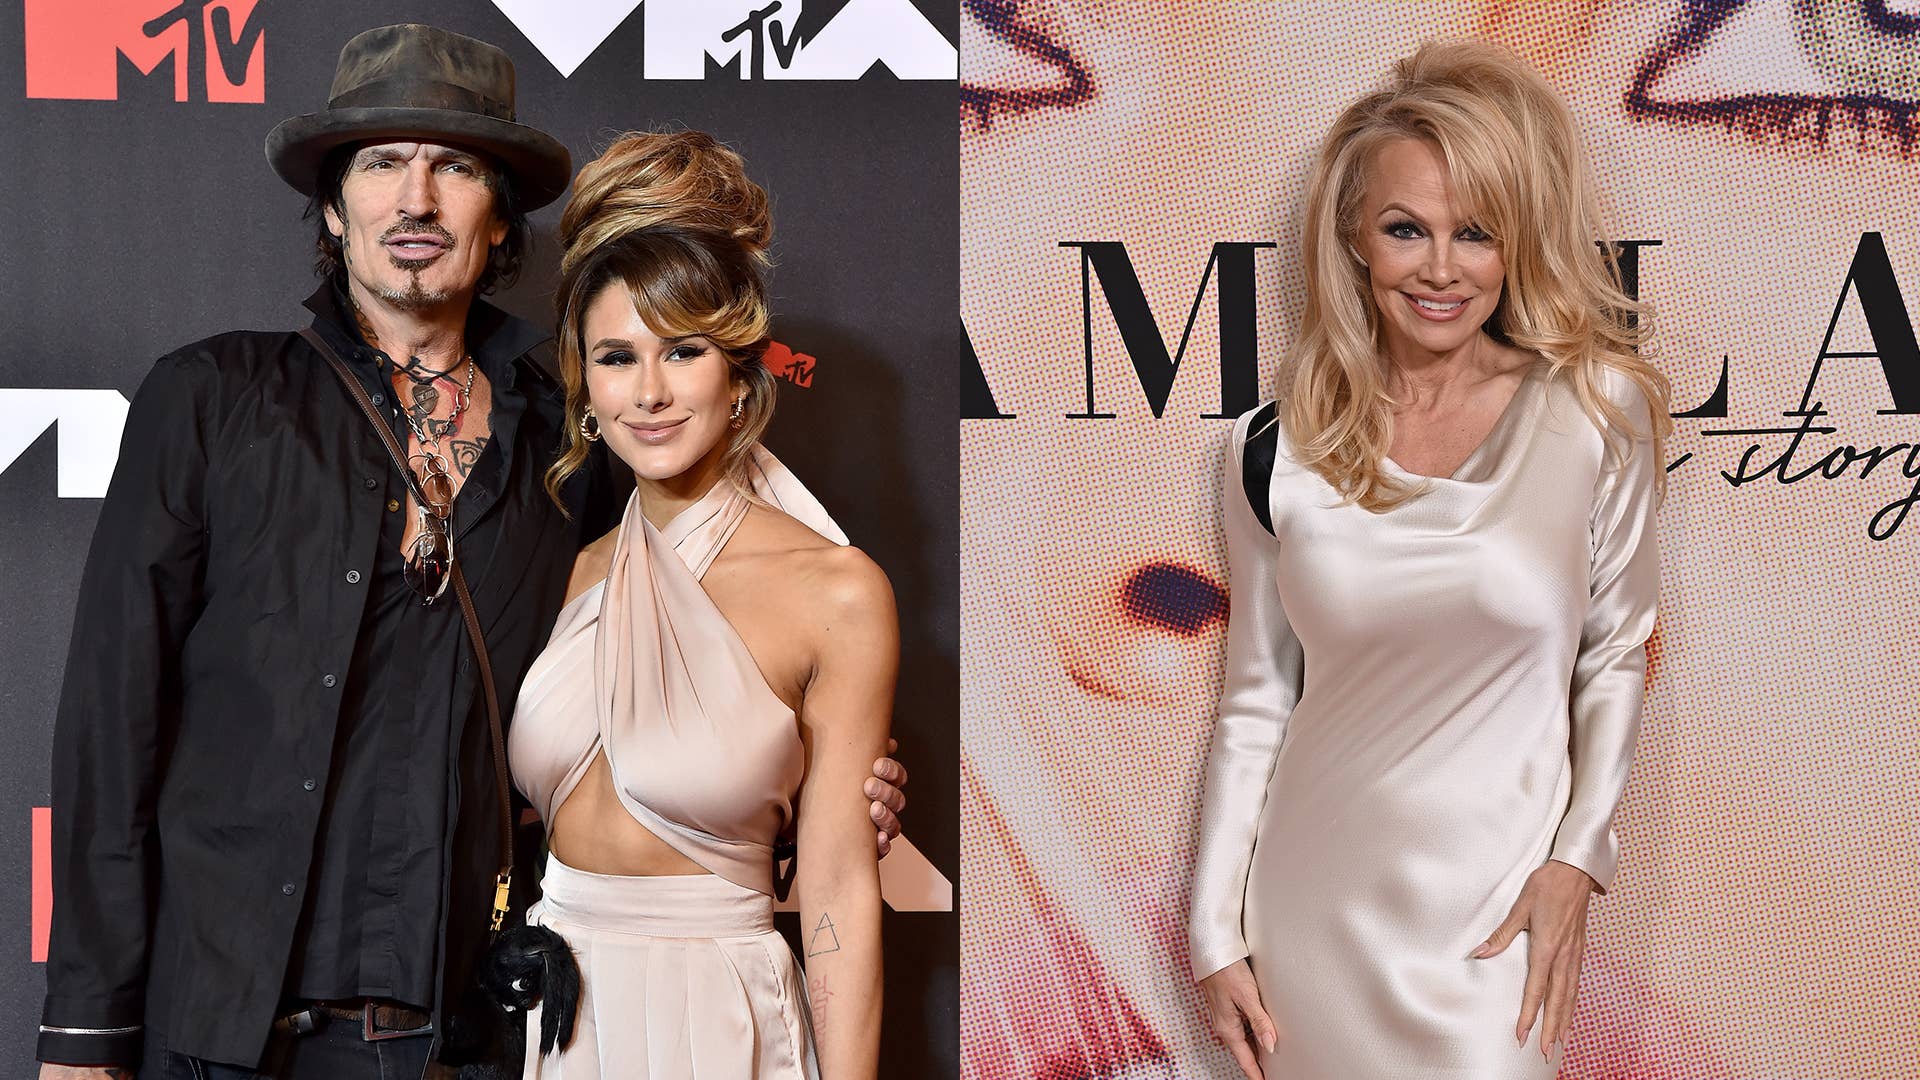 Tommy Lee and Brittany Furlan attend the 2021 MTV Video Music Awards/Pamela Anderson attends the "Pamela, a love story" NY screening